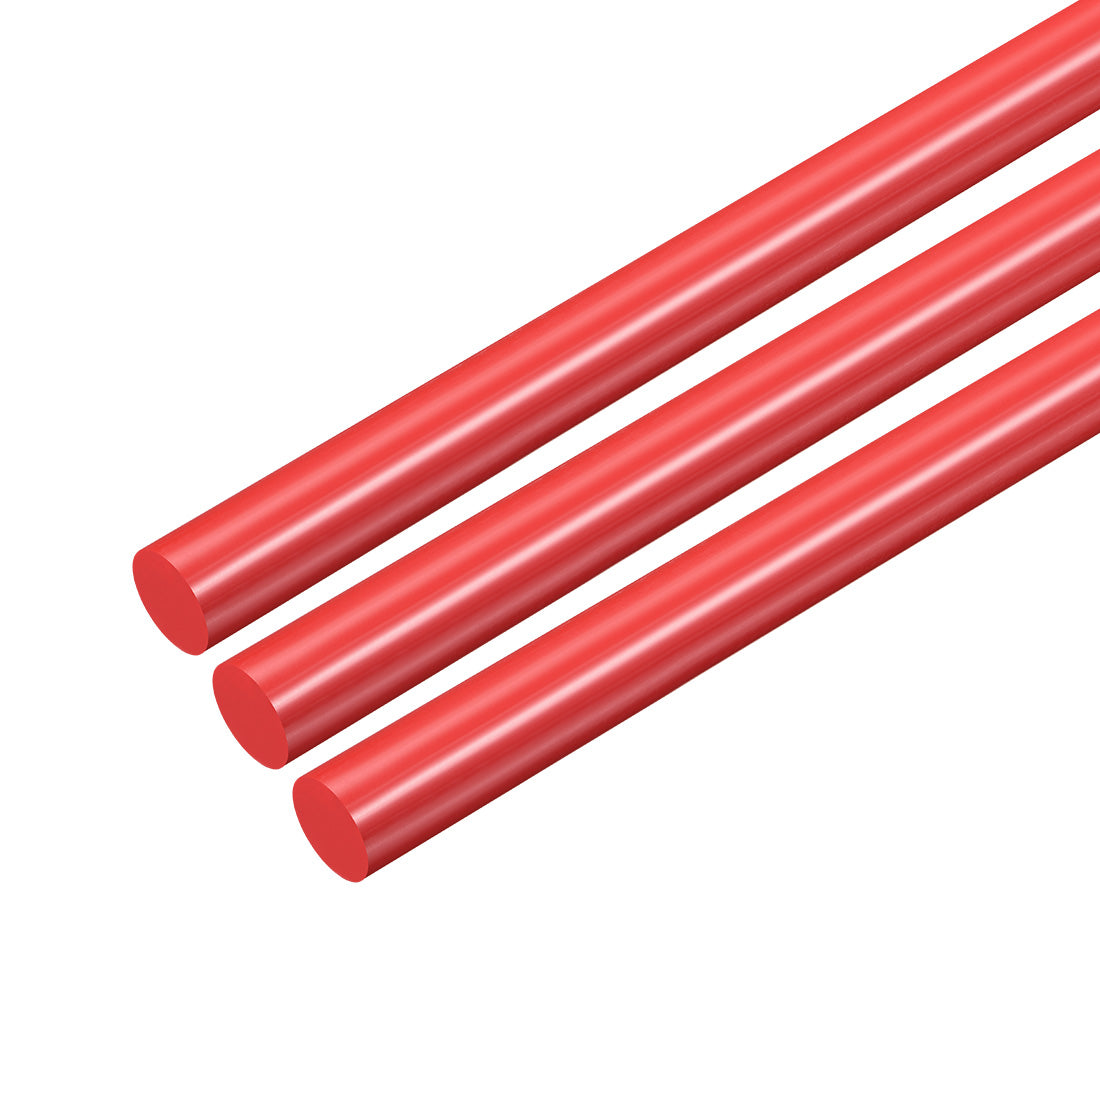 uxcell Uxcell Plastic Round Rod,6mm Dia 50cm Red Engineering Plastic Round Bar 3pcs